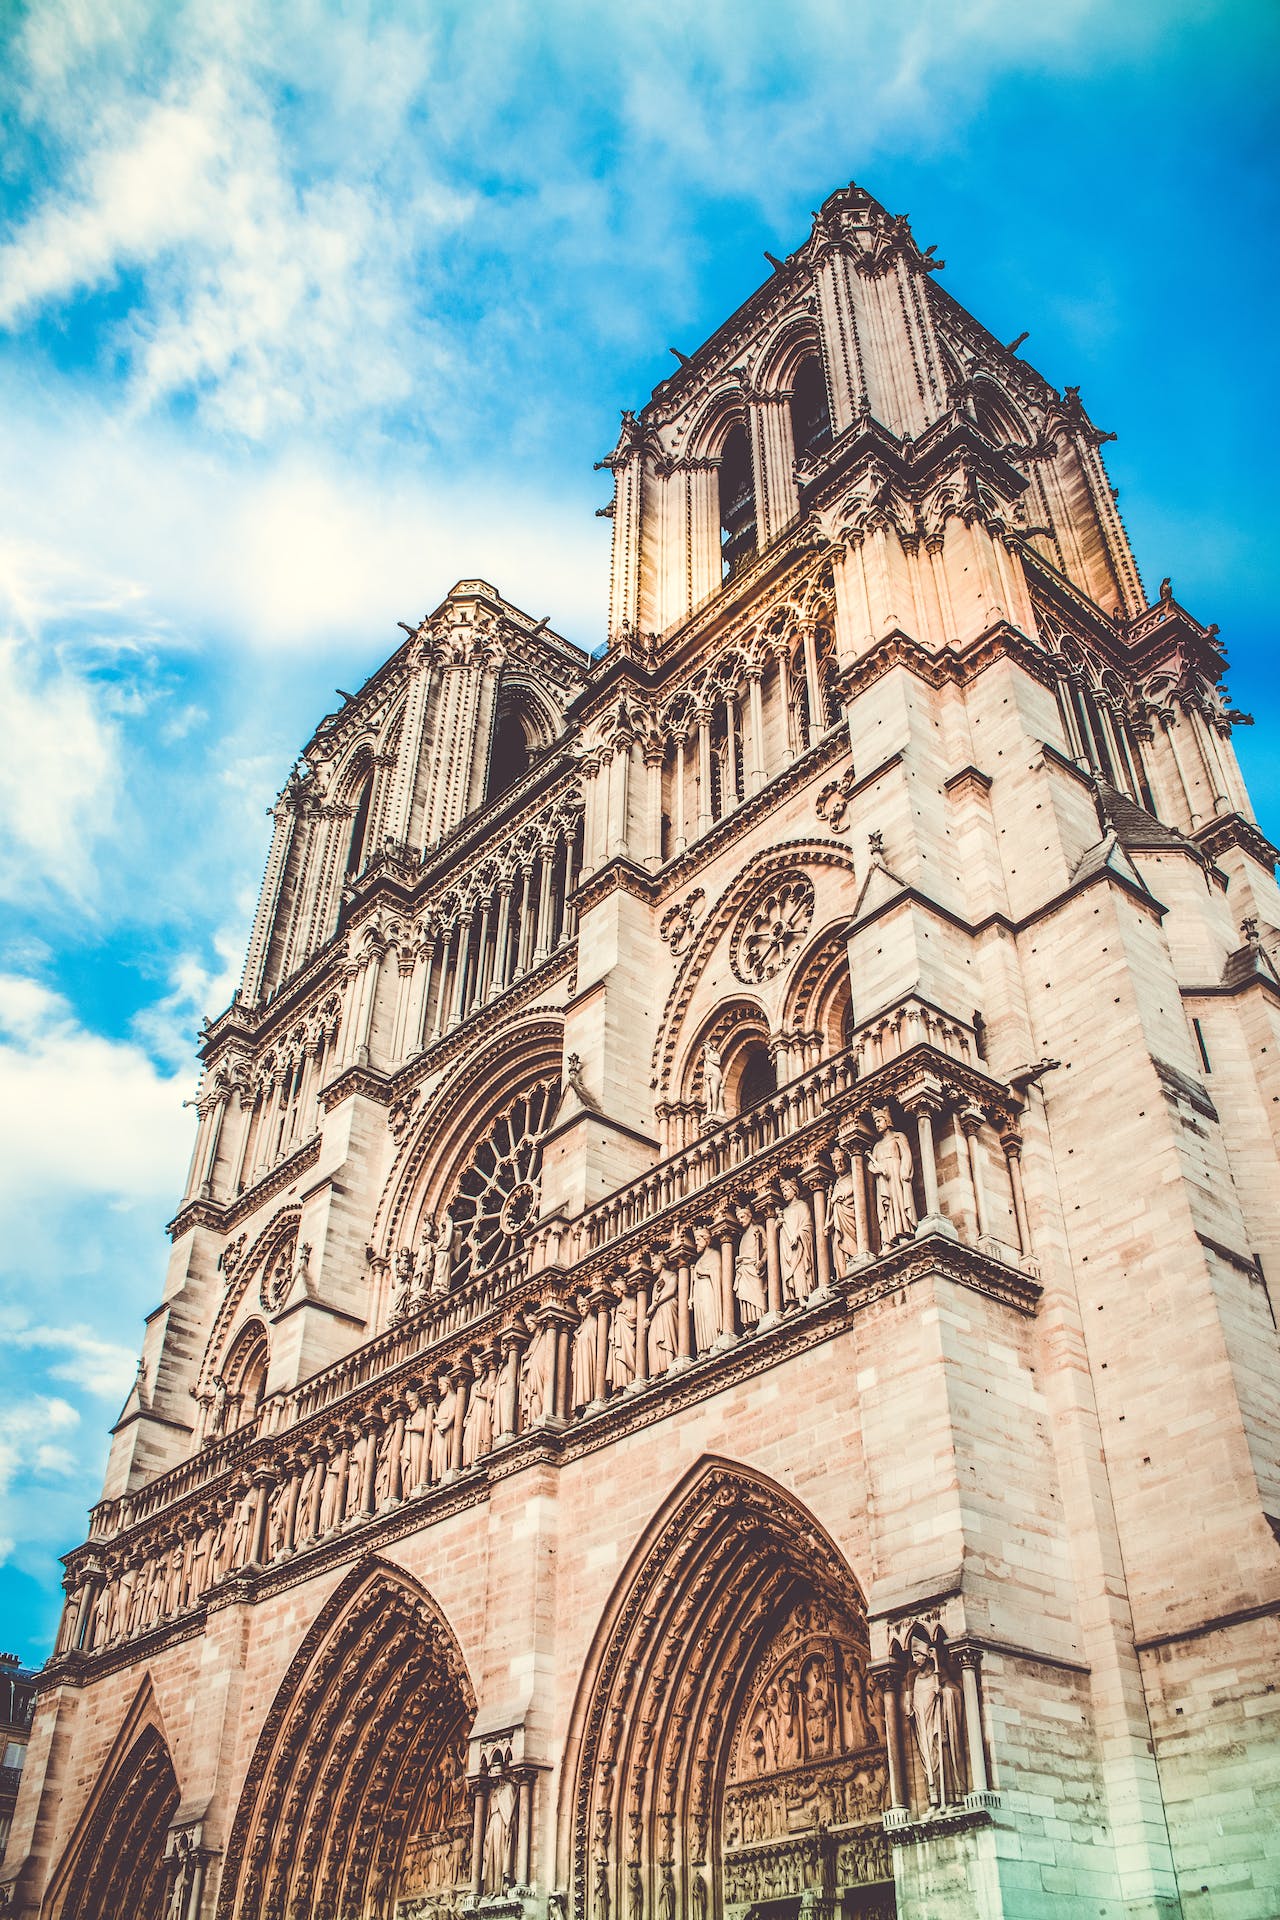 History of Notre Dame Cathedral, Paris